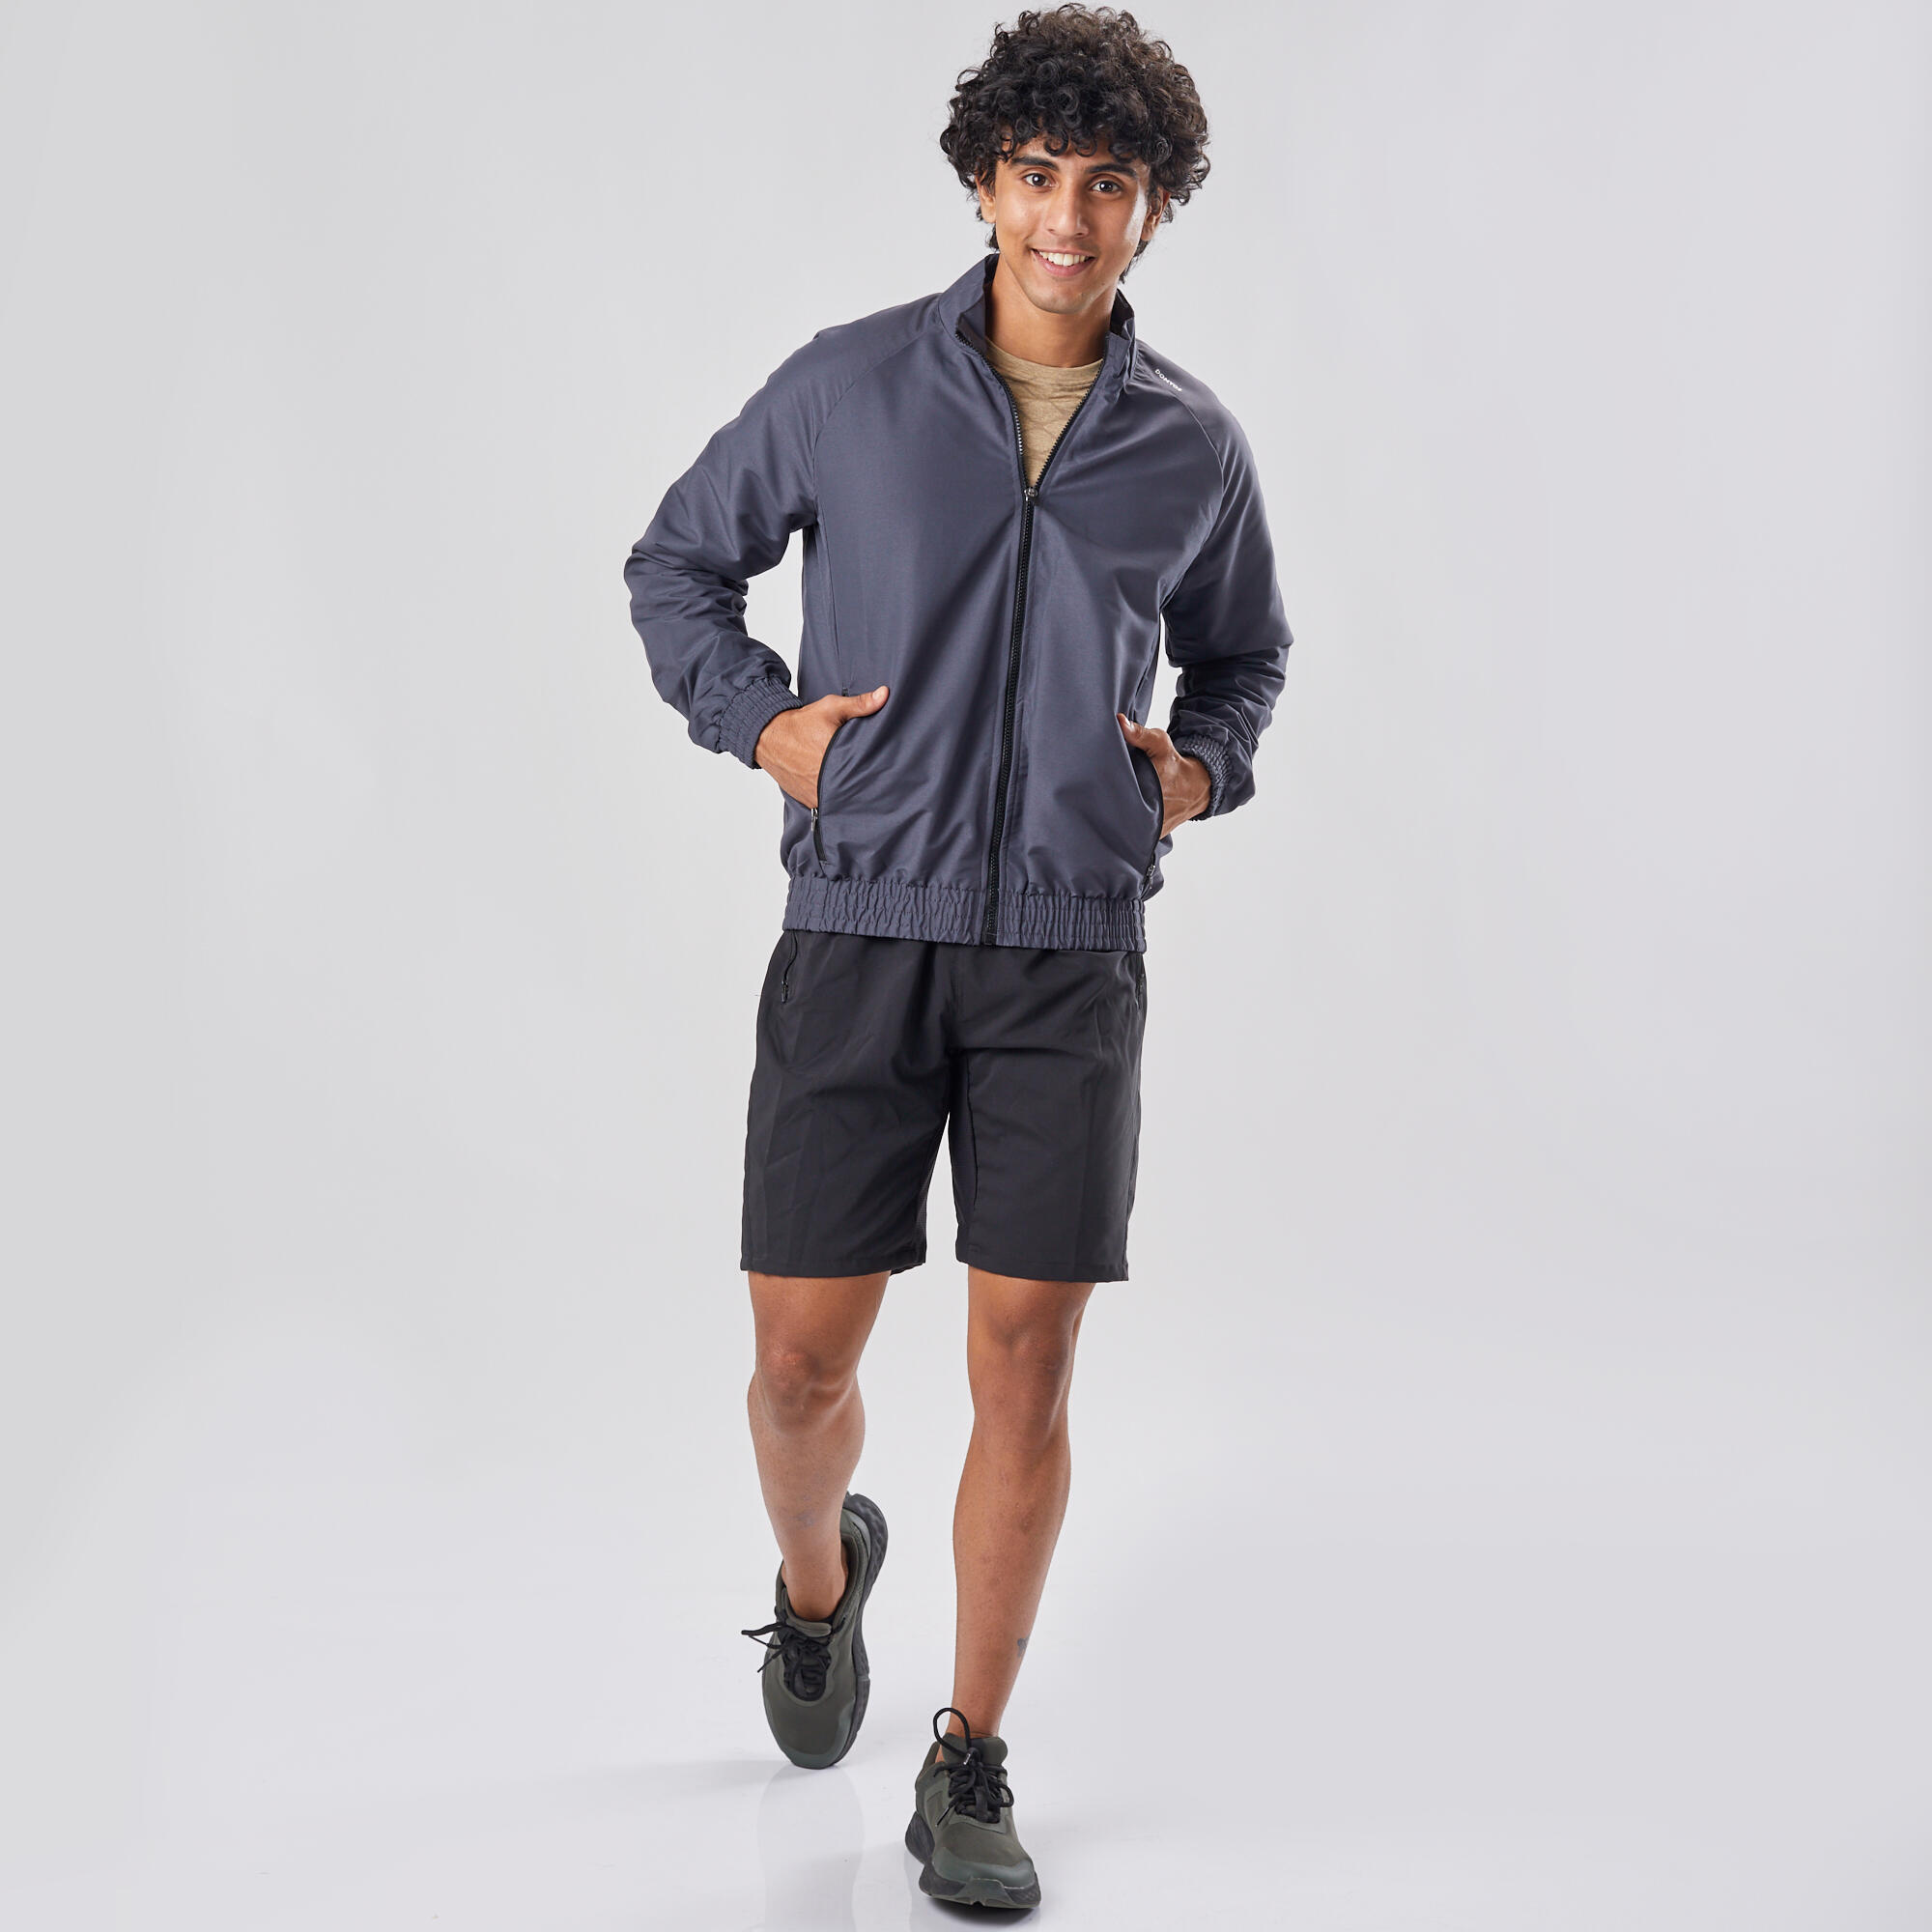 The North Face Trailwear Wind Whistle Jacket - Men's | evo